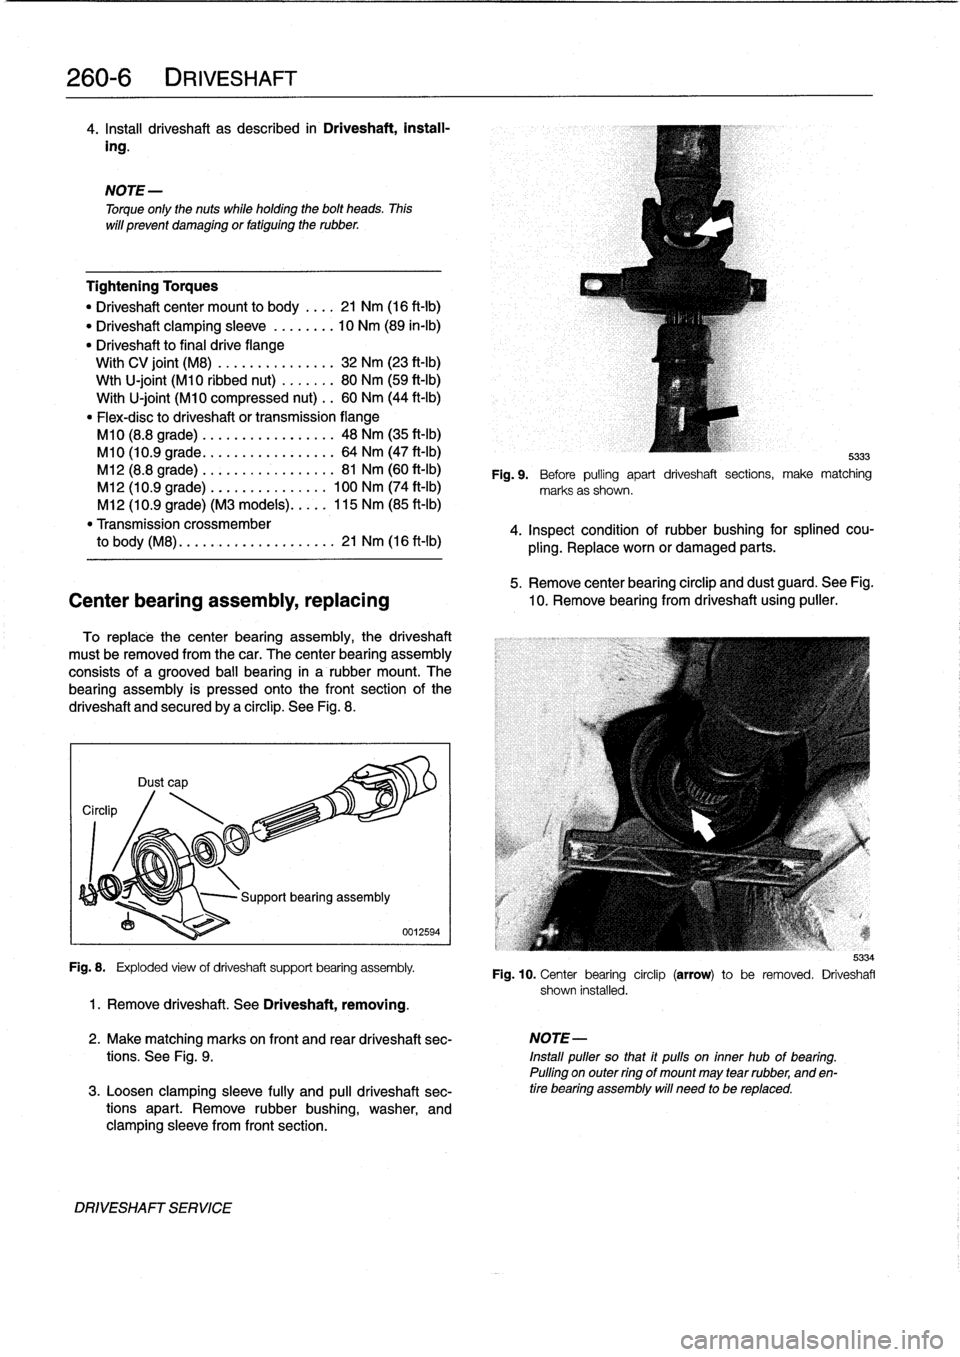 BMW 328i 1995 E36 User Guide 
260-
6
DRIVESHAFT

4
.
Insta¡¡
driveshaft
as
described
in
Driveshaft,
install-

ing
.

Tightening
Torques

"
Driveshaft
center
mount
to
body
.
...
21
Nm
(16
ft-Ib)

"
Driveshaft
clamping
sleeve
...